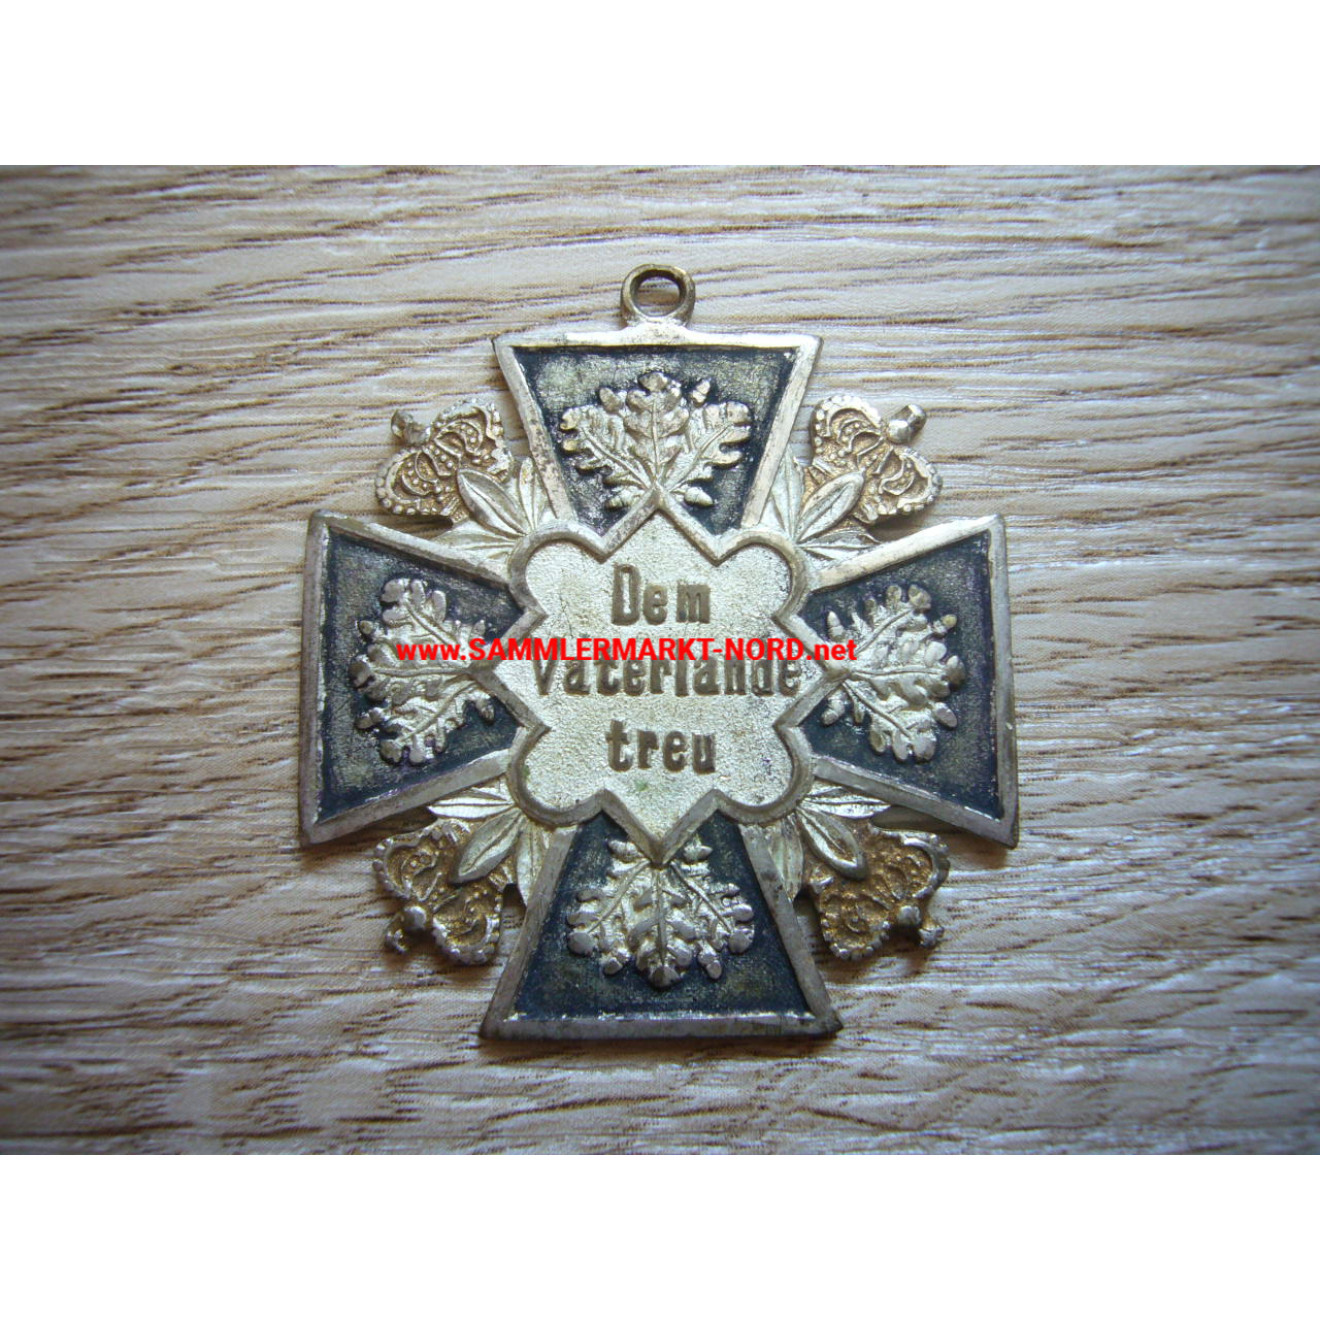 Loyal to the Fatherland - Cross of Honor of a warriors' association